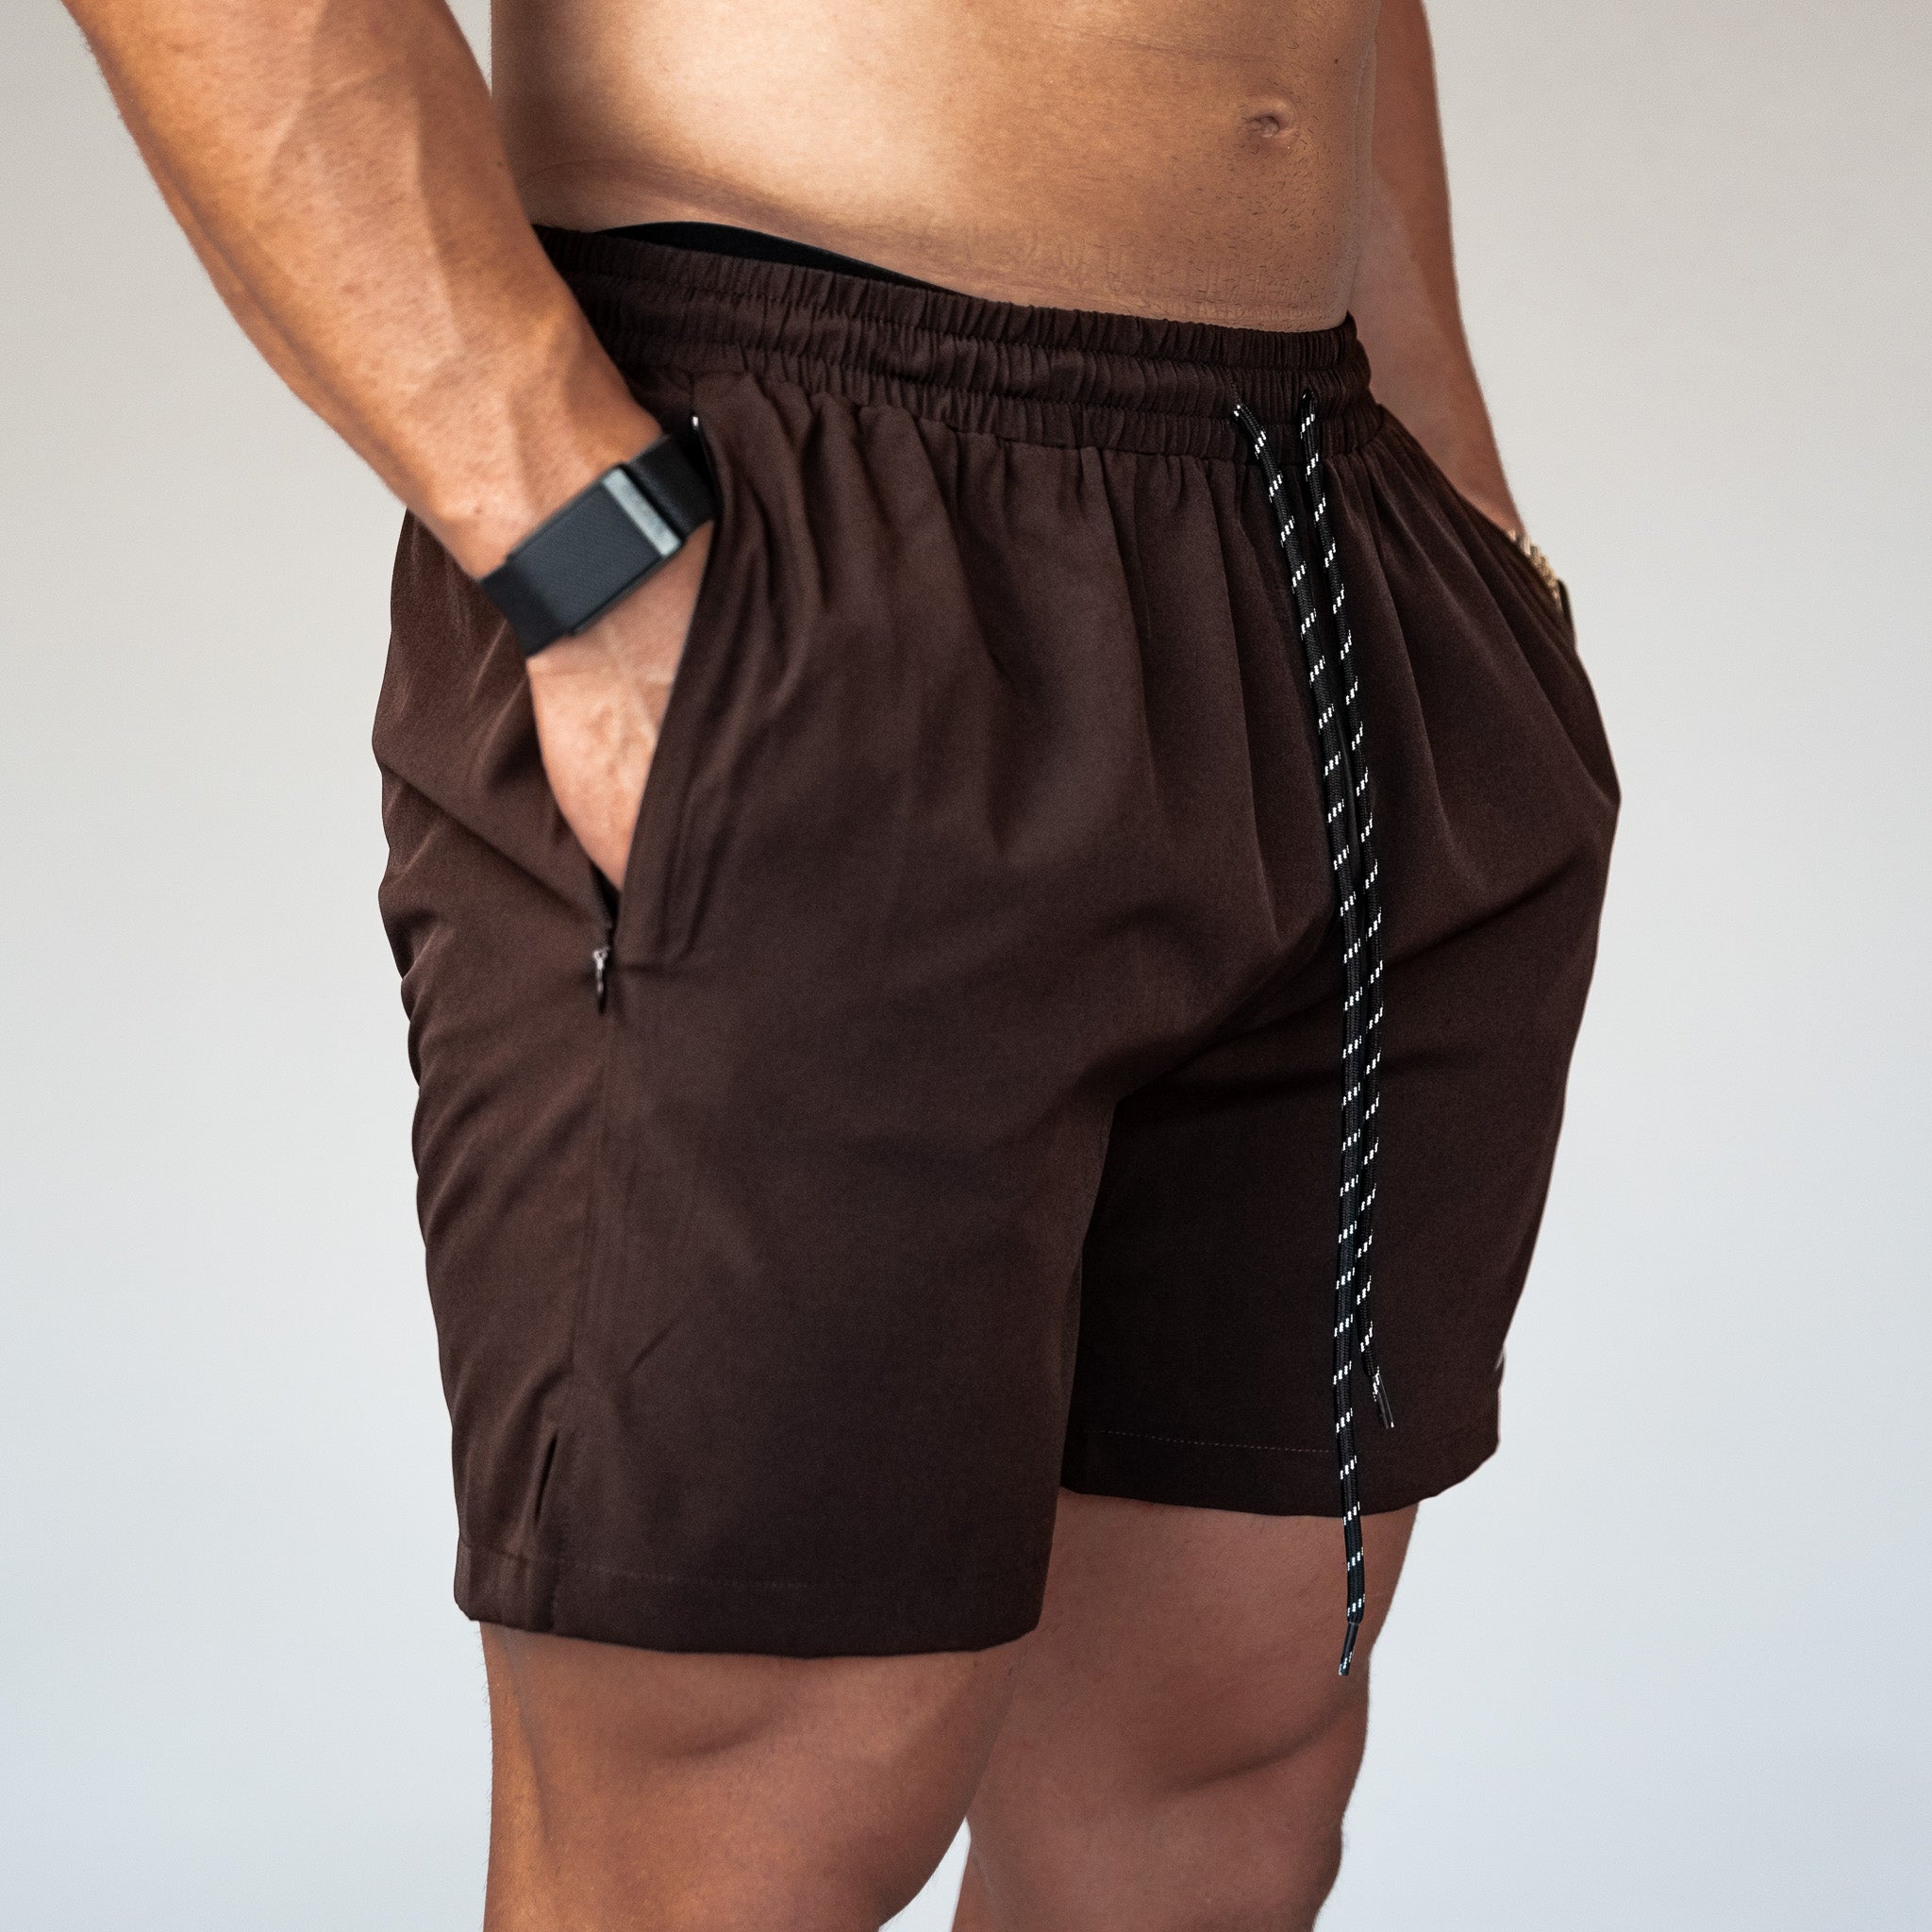 Uphill Performance Shorts Brown